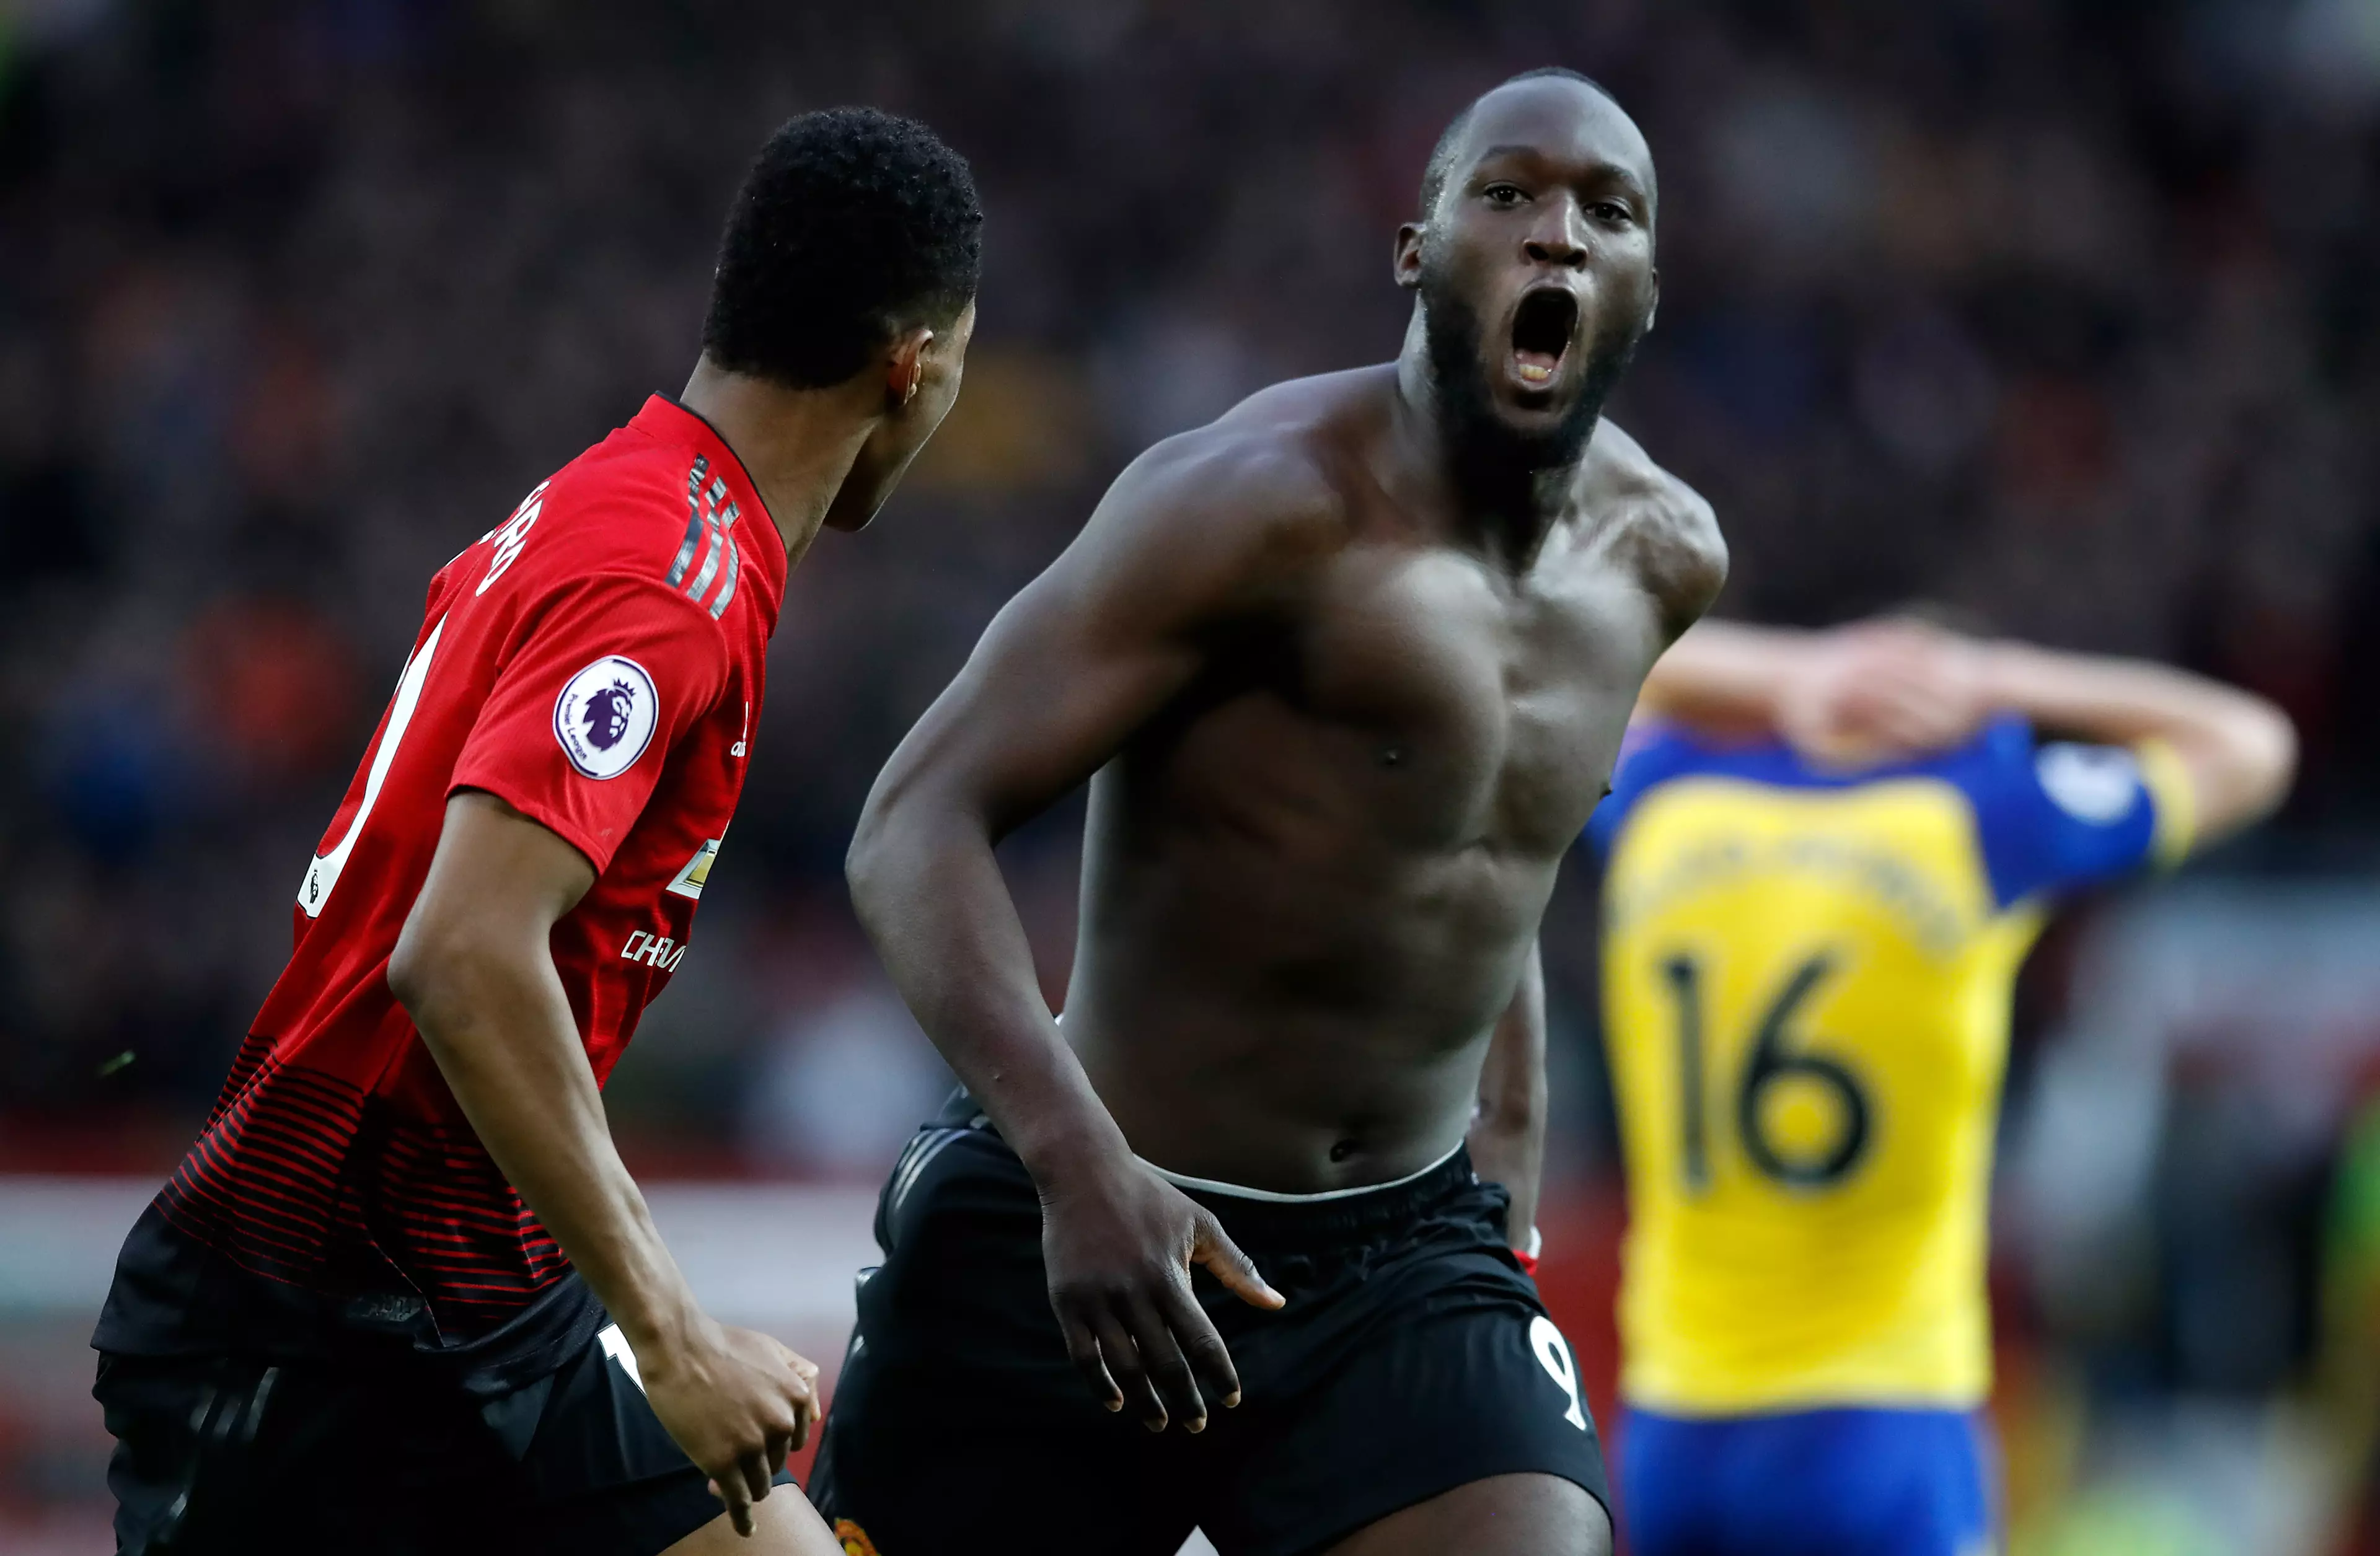 Lukaku could be heading out of Old Trafford. Image: PA Images